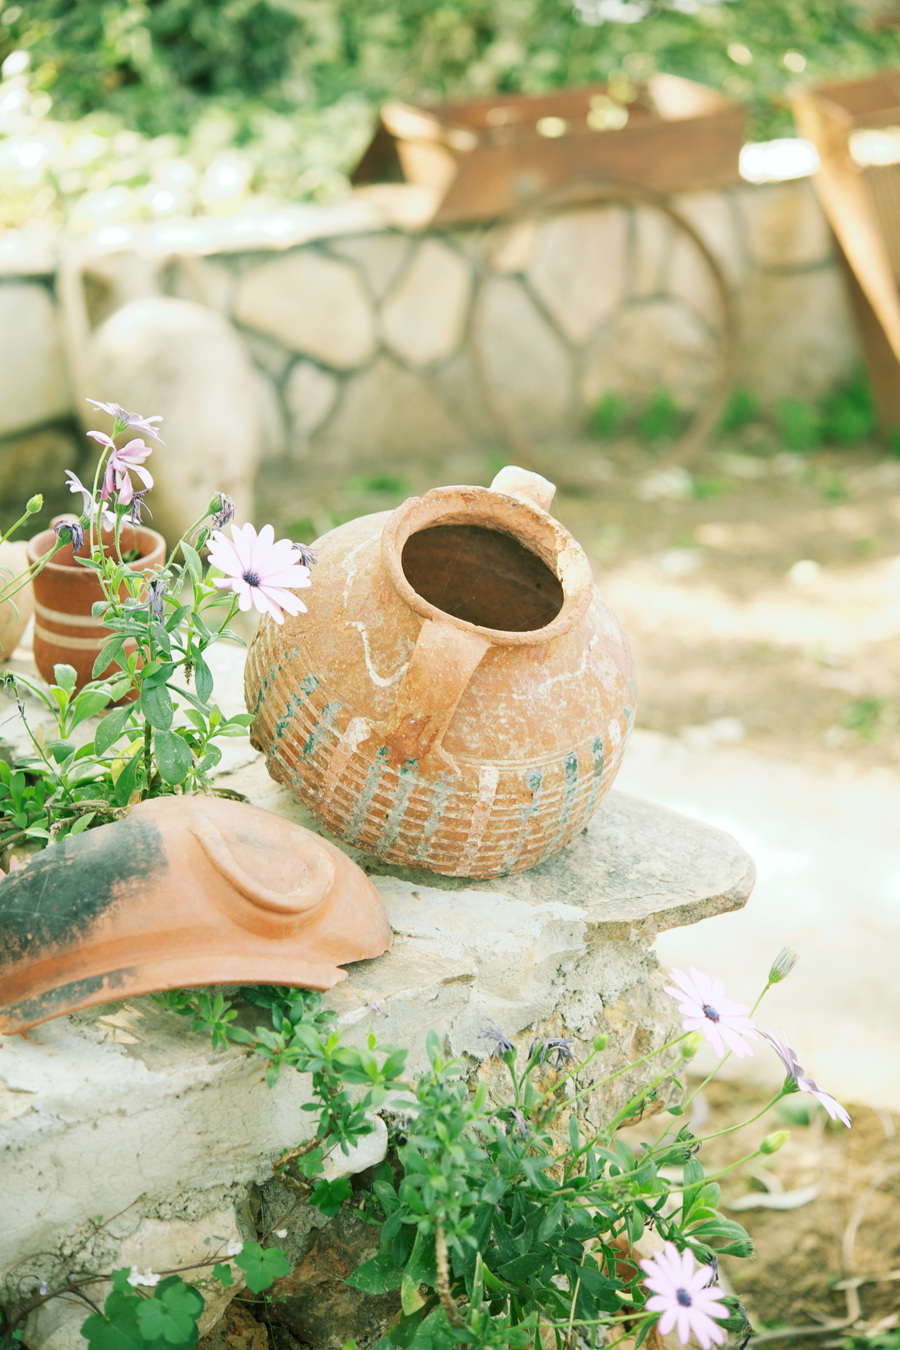 Clay Pots in Southern Turkey